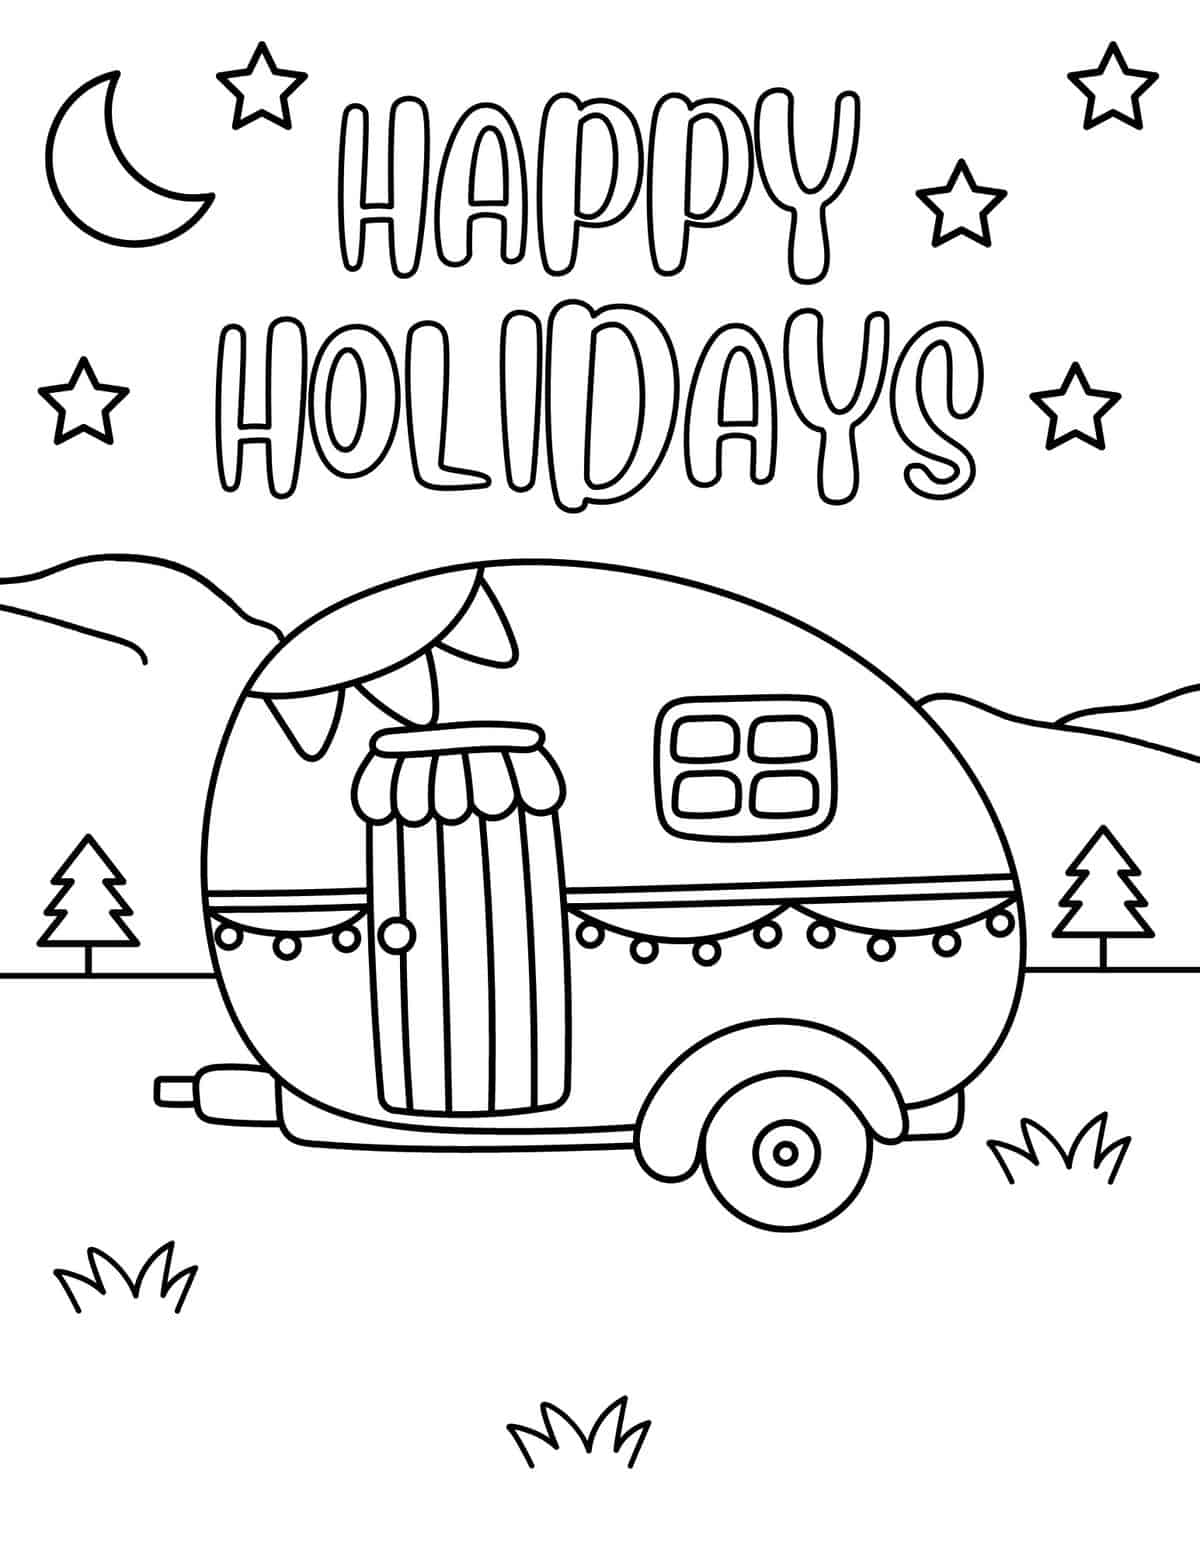 Happy holidays vintage camper parked by mountains